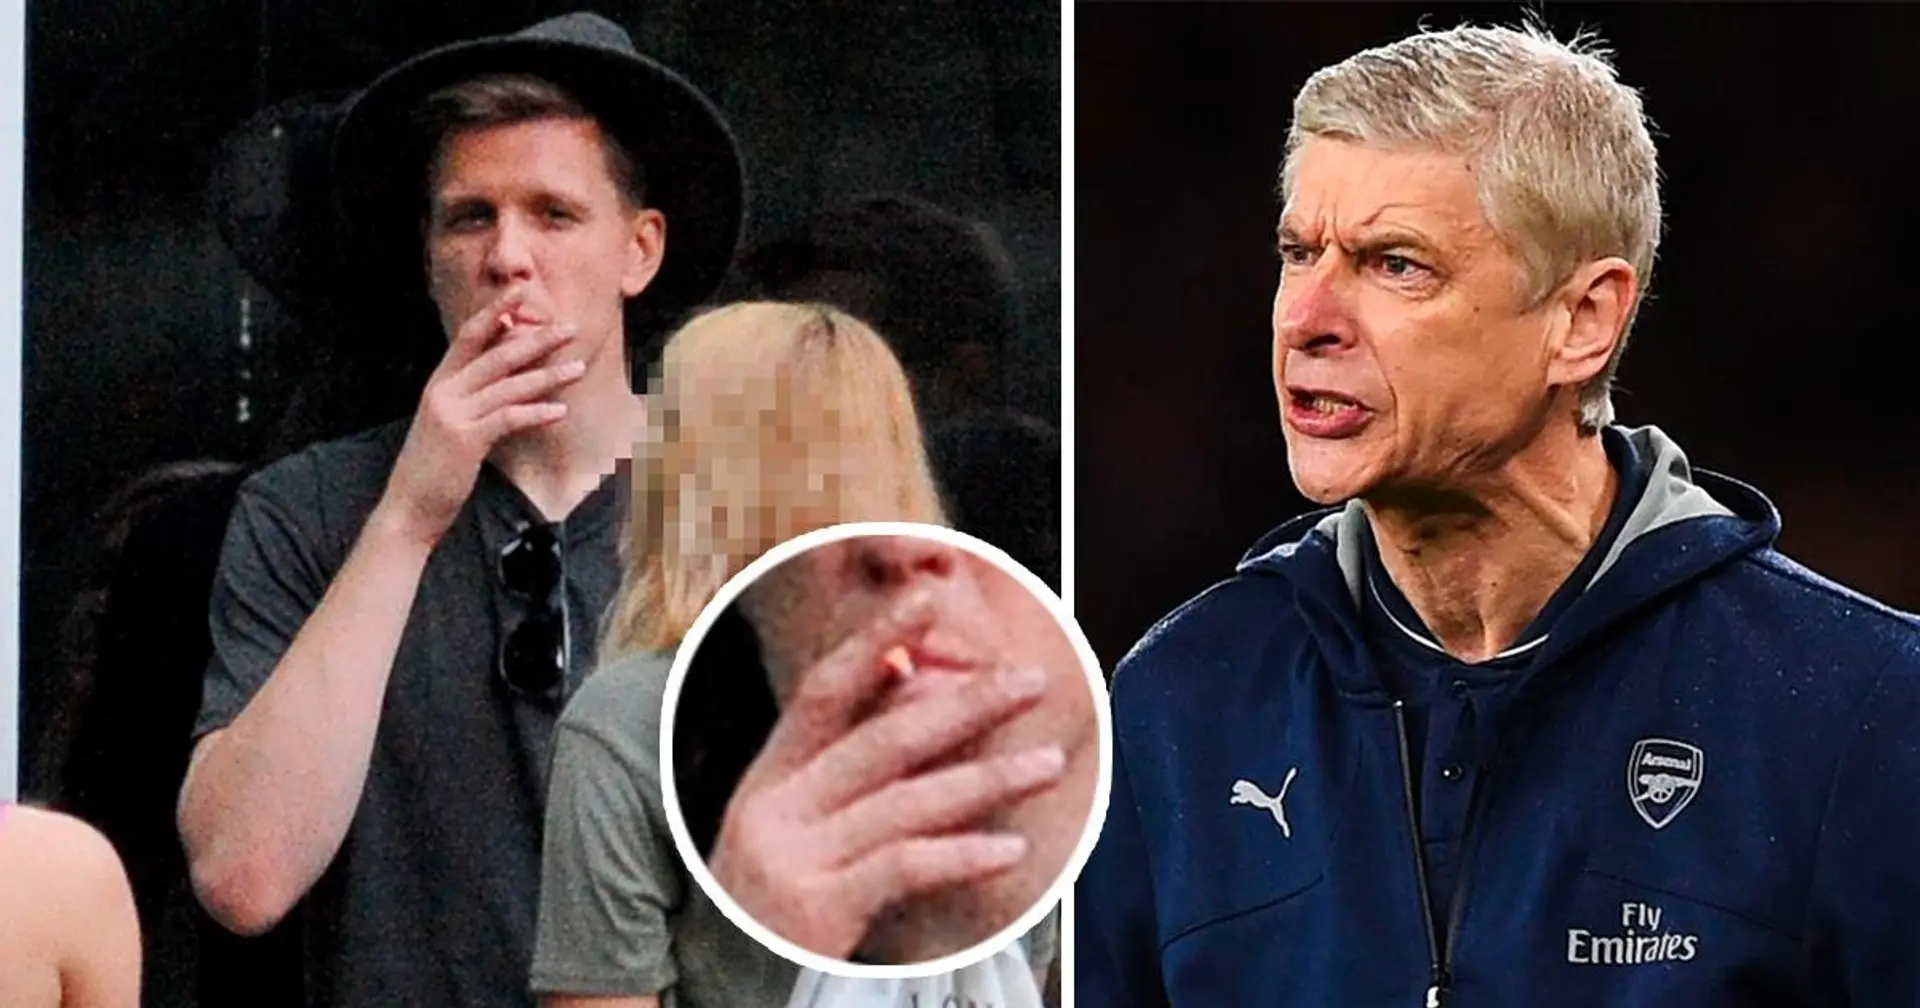 Szczesny recalls Wenger’s reaction when he got caught smoking a cigarette in the dressing room